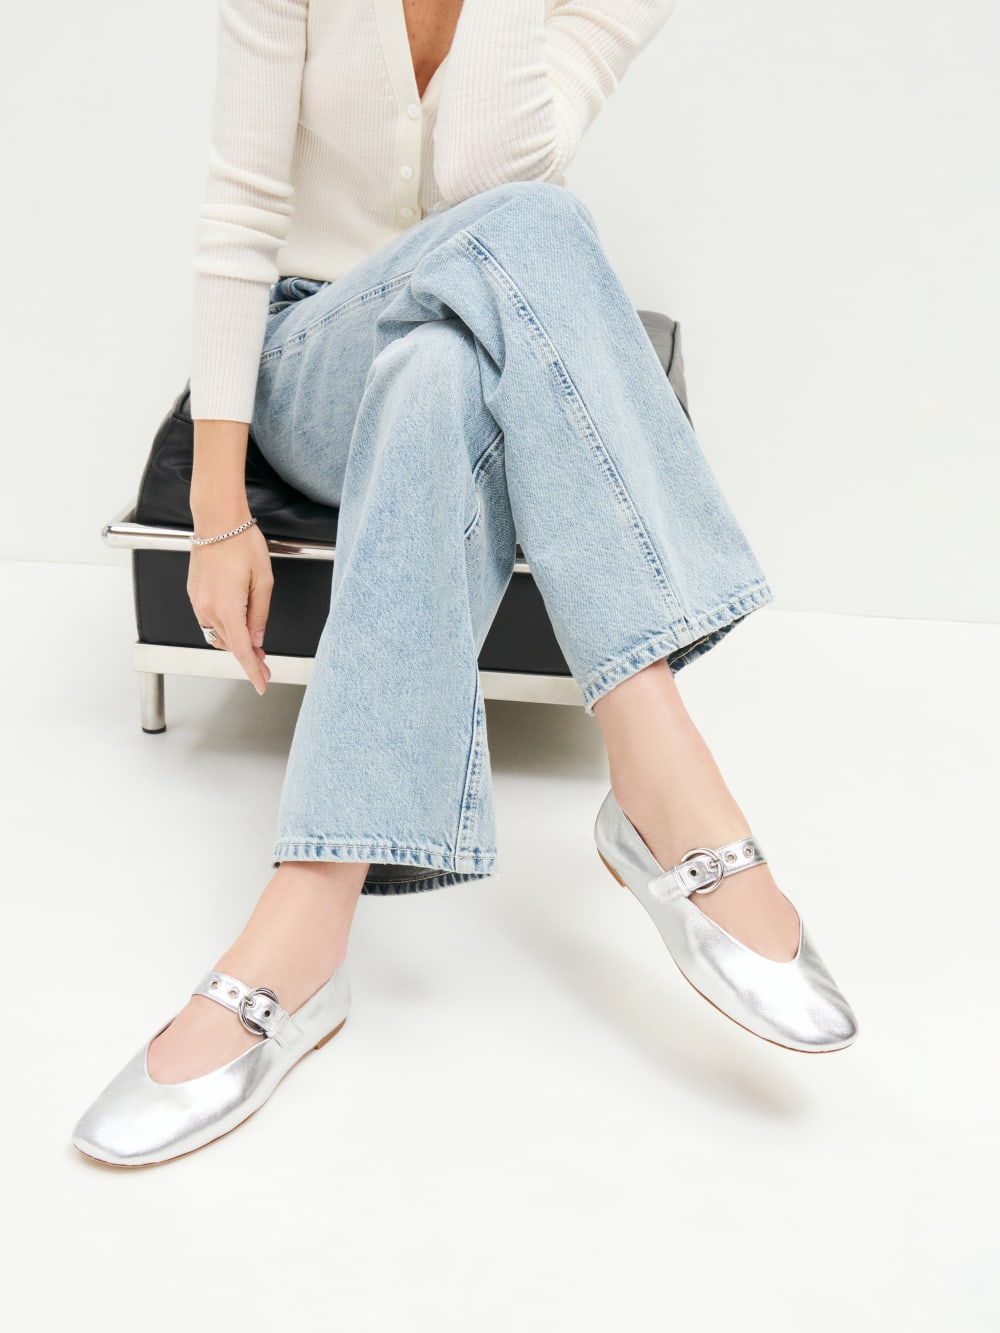 Reformation silver Bethany ballet flat  with a strap across the front and adjustable buckle. 